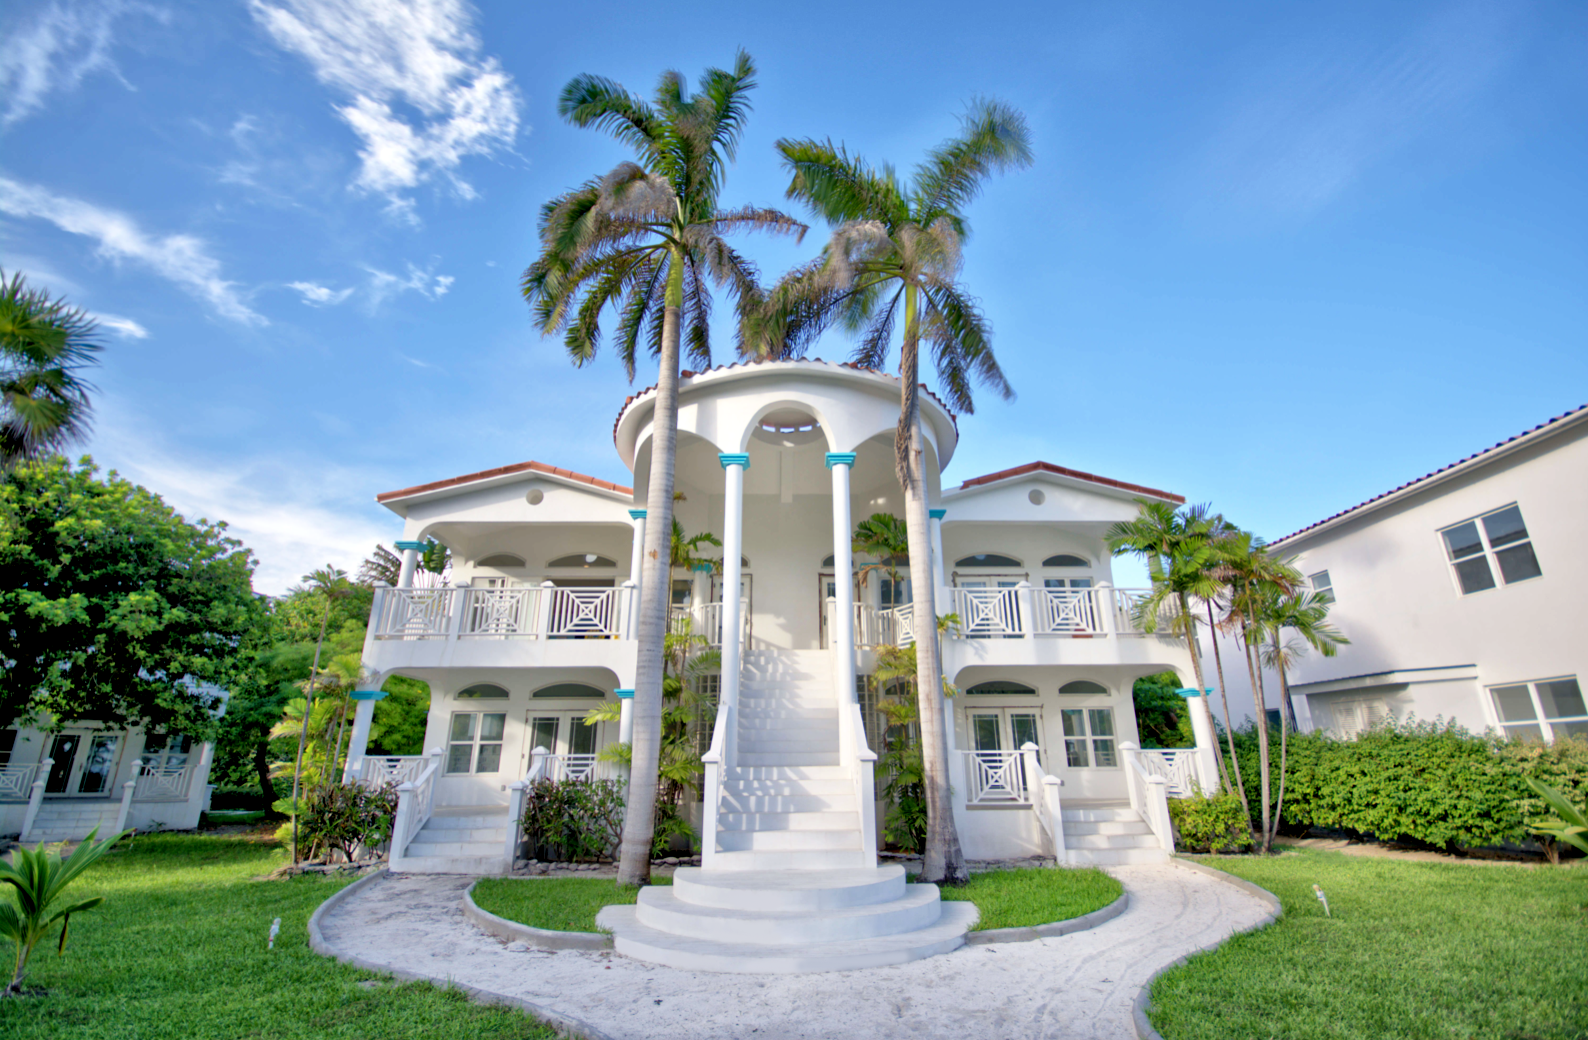 Discover Exclusive Property Listings Across Belize